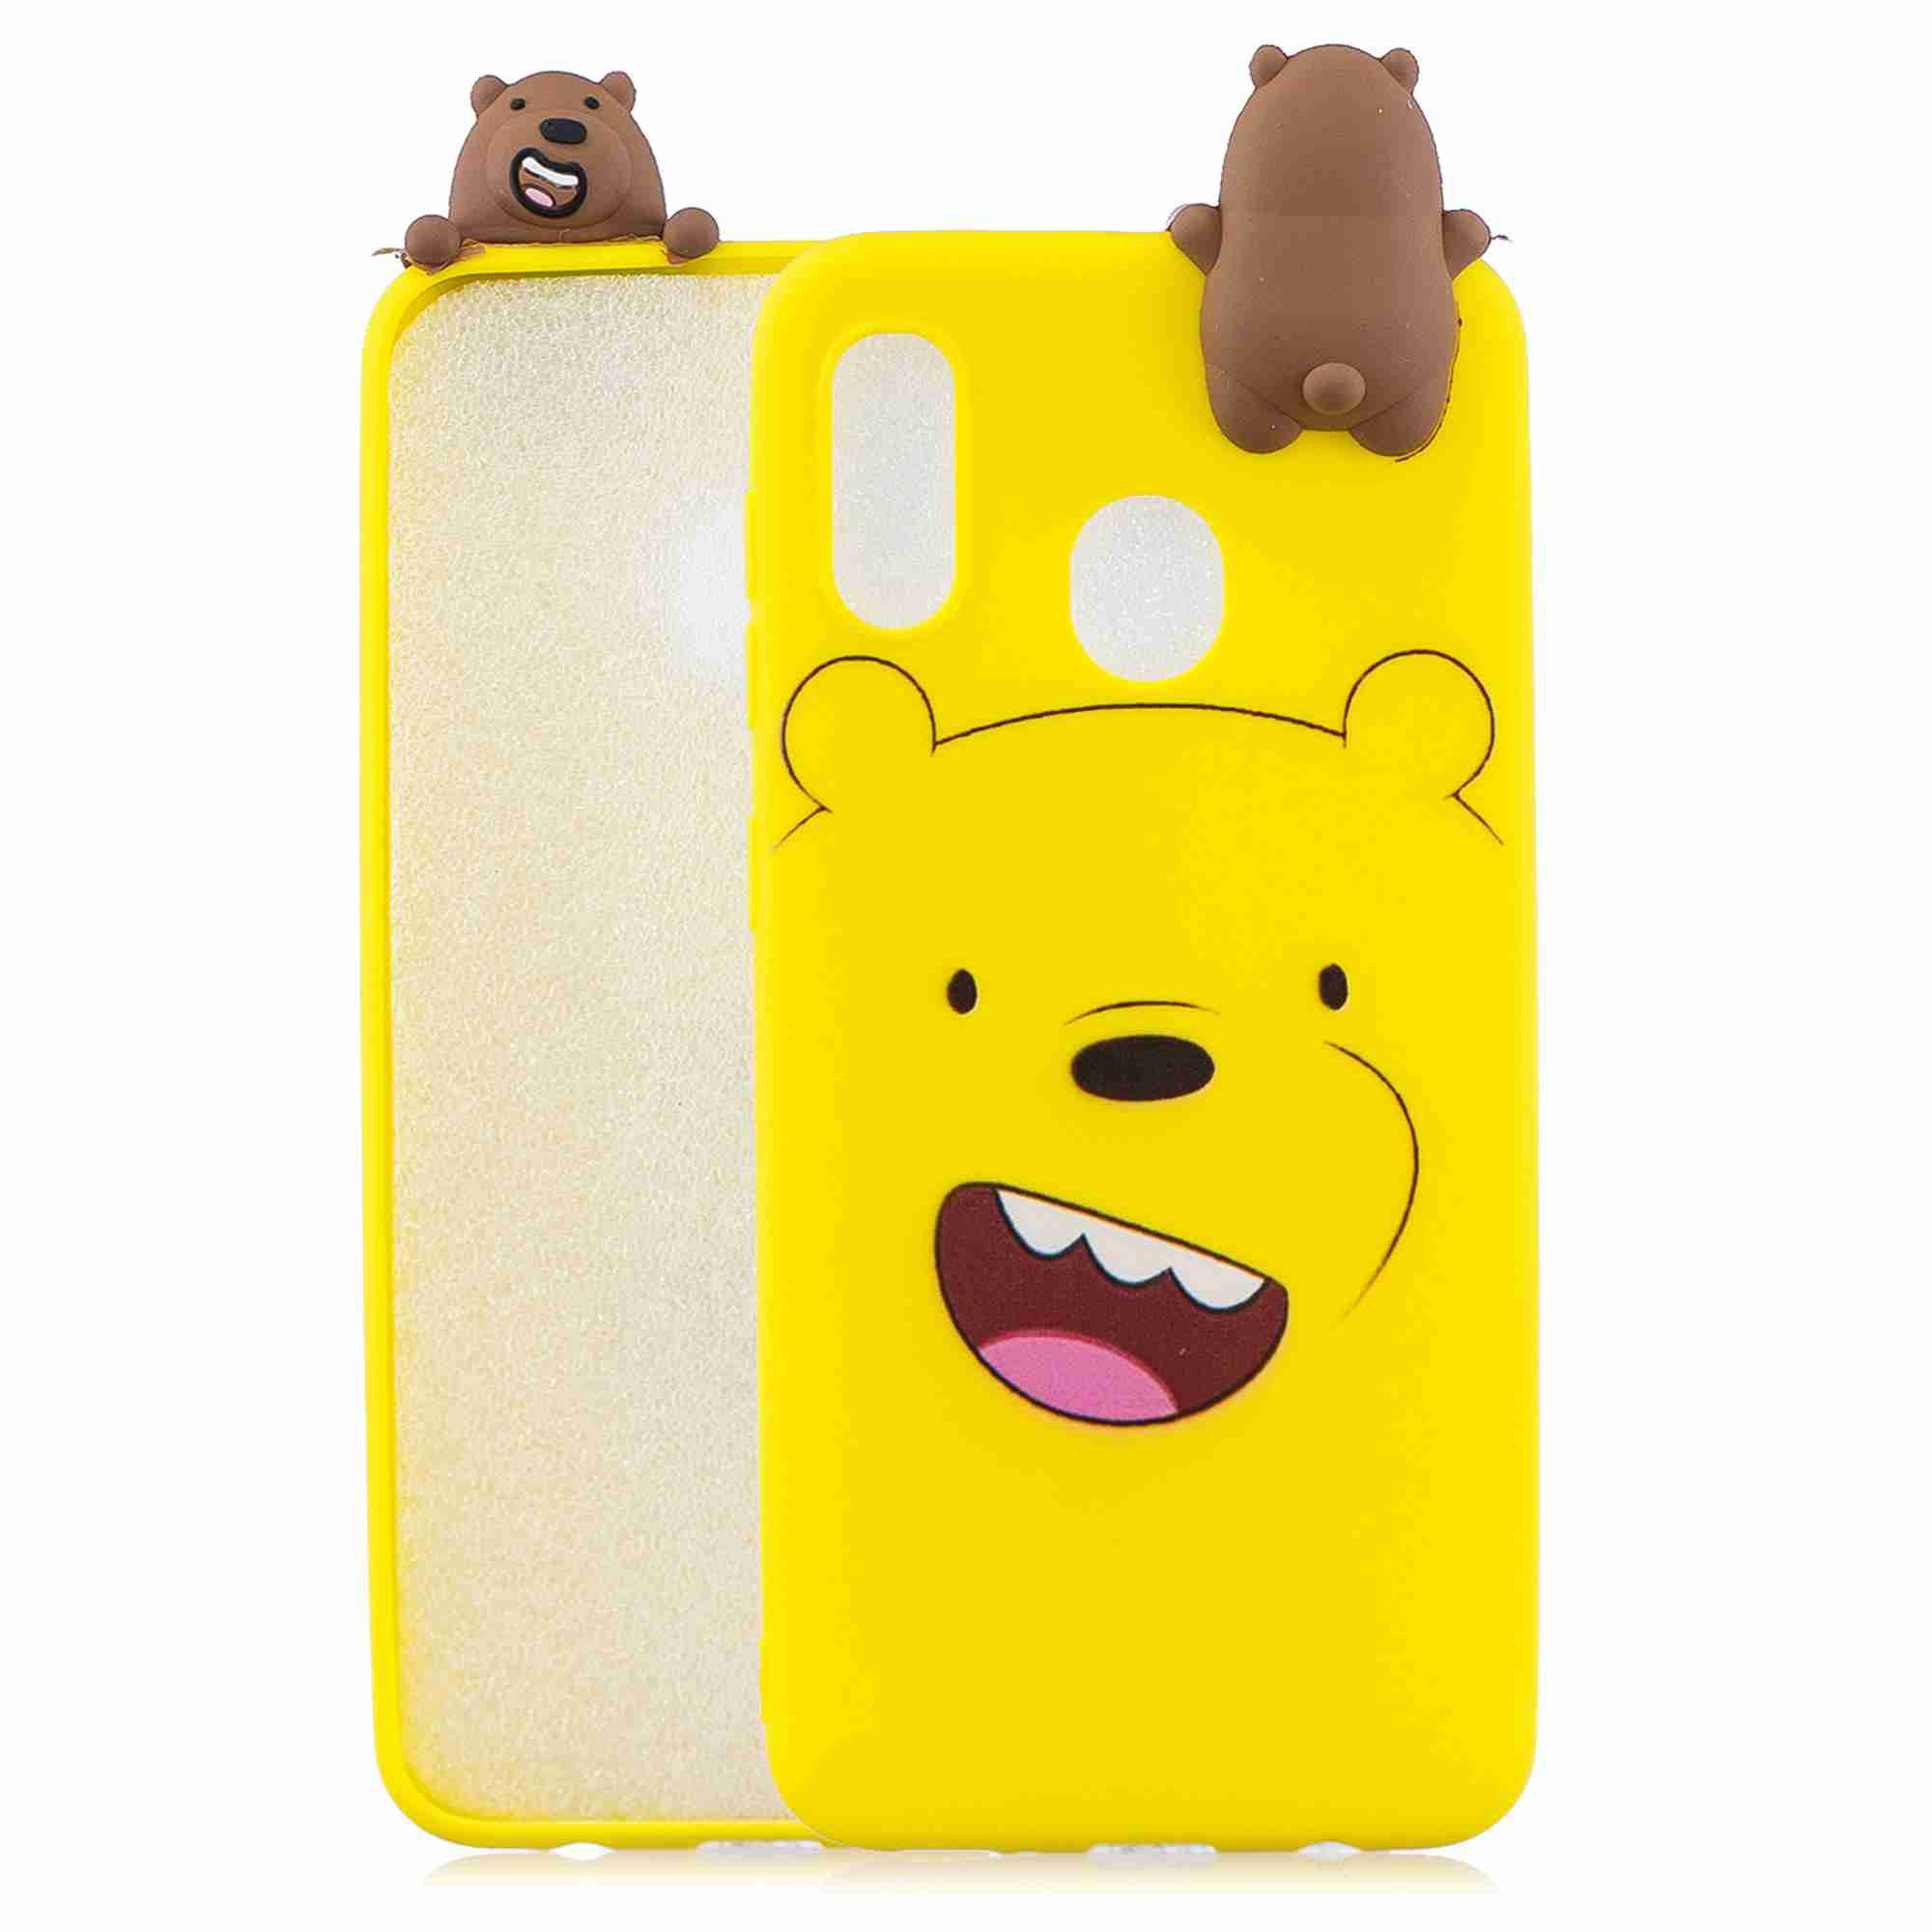 Tznzxm for Samsung Galaxy S9 Case Funny 3D Cartoon Animals Character Shockproof Full Protective Soft Silicone Rubber Anti-Scratch Non-Slip Phone Back Case for Samsung Galaxy S9 5.8 inch Rabbit 